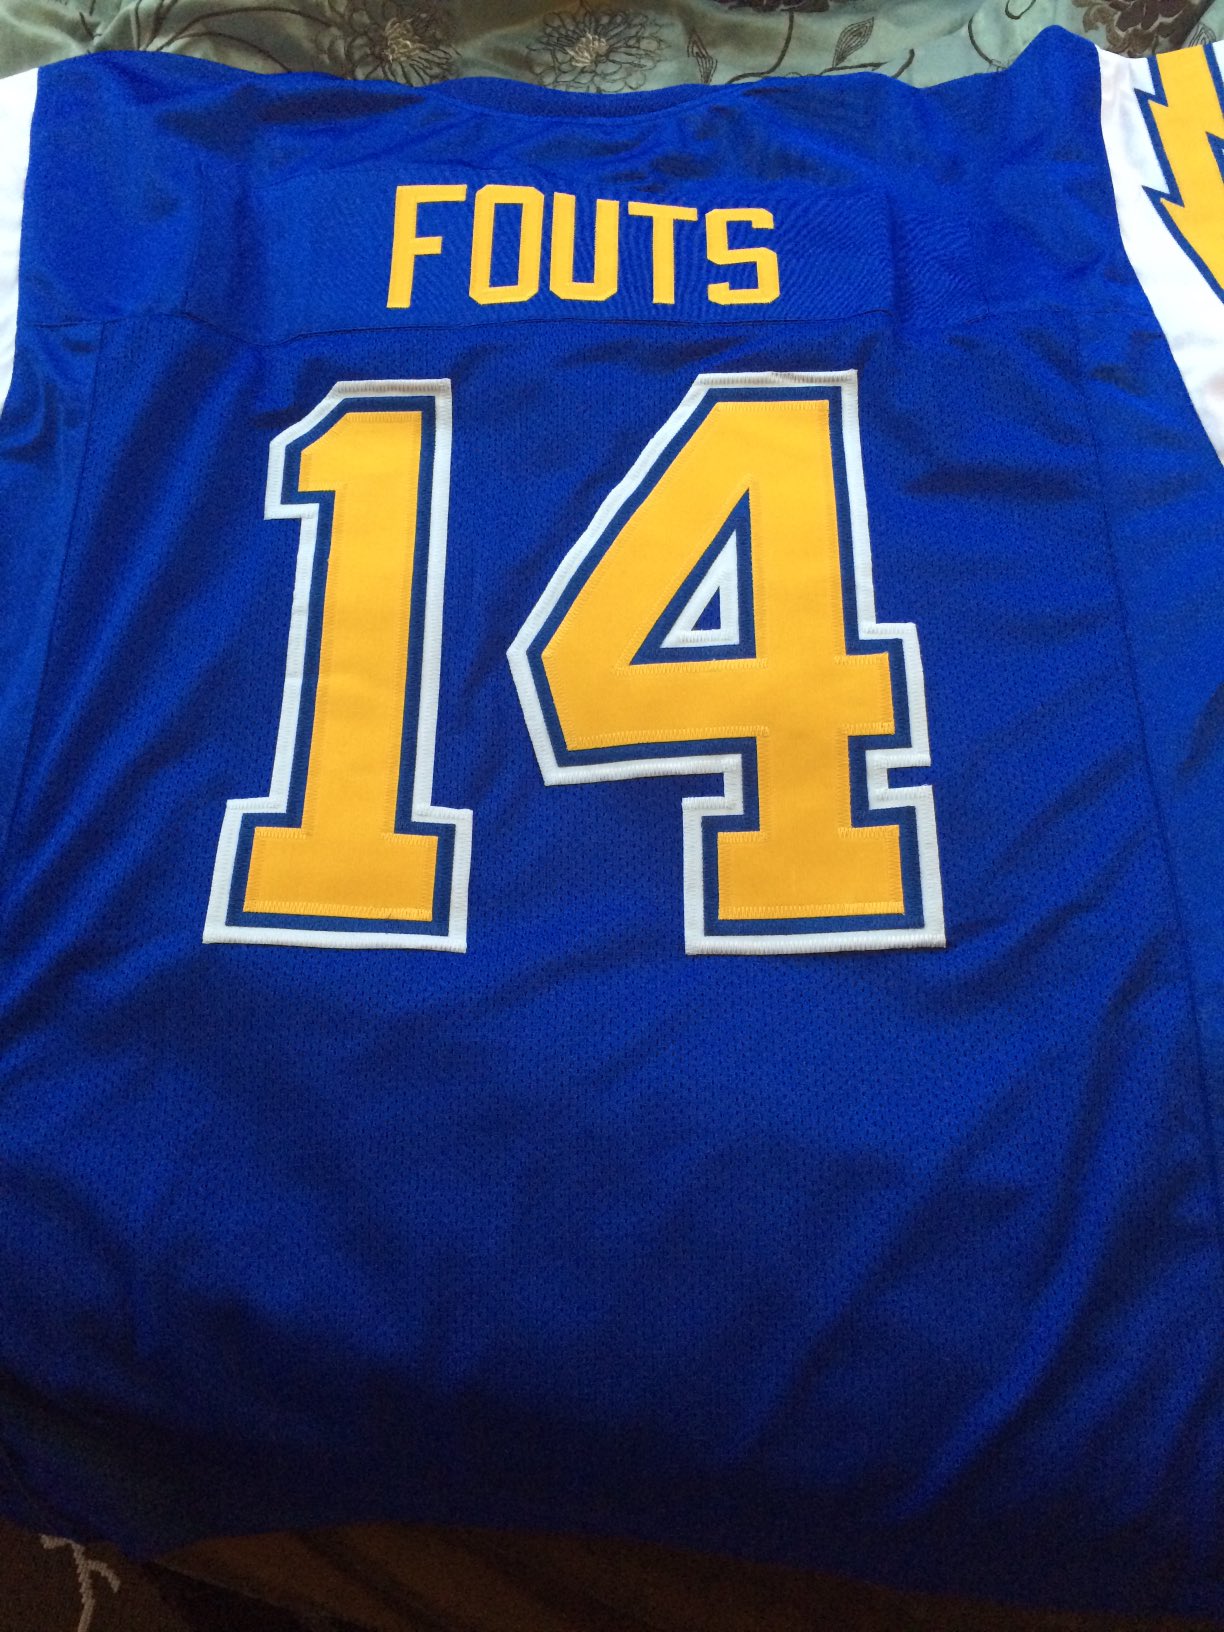 Happy birthday today to the legendary DAN FOUTS!! 